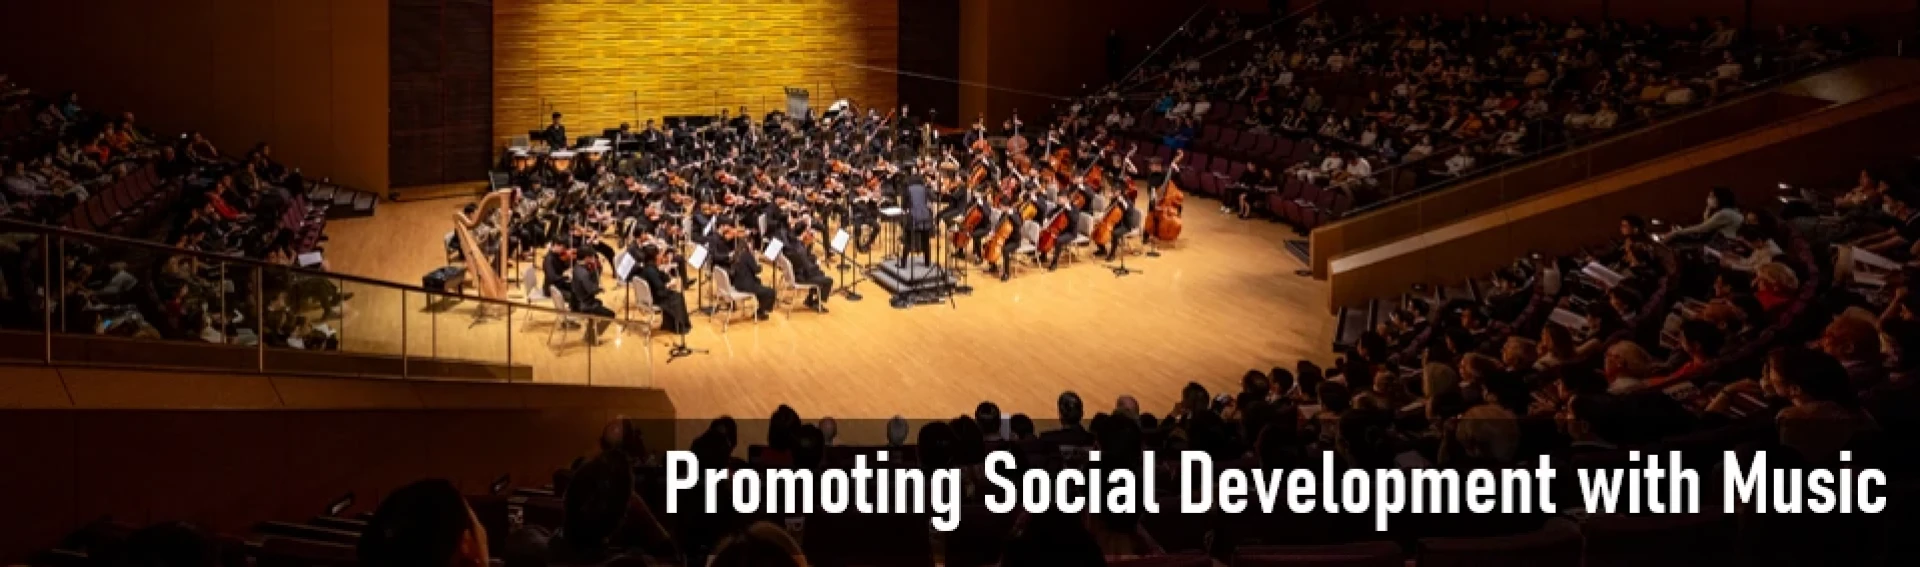 Promoting Social Development with Music